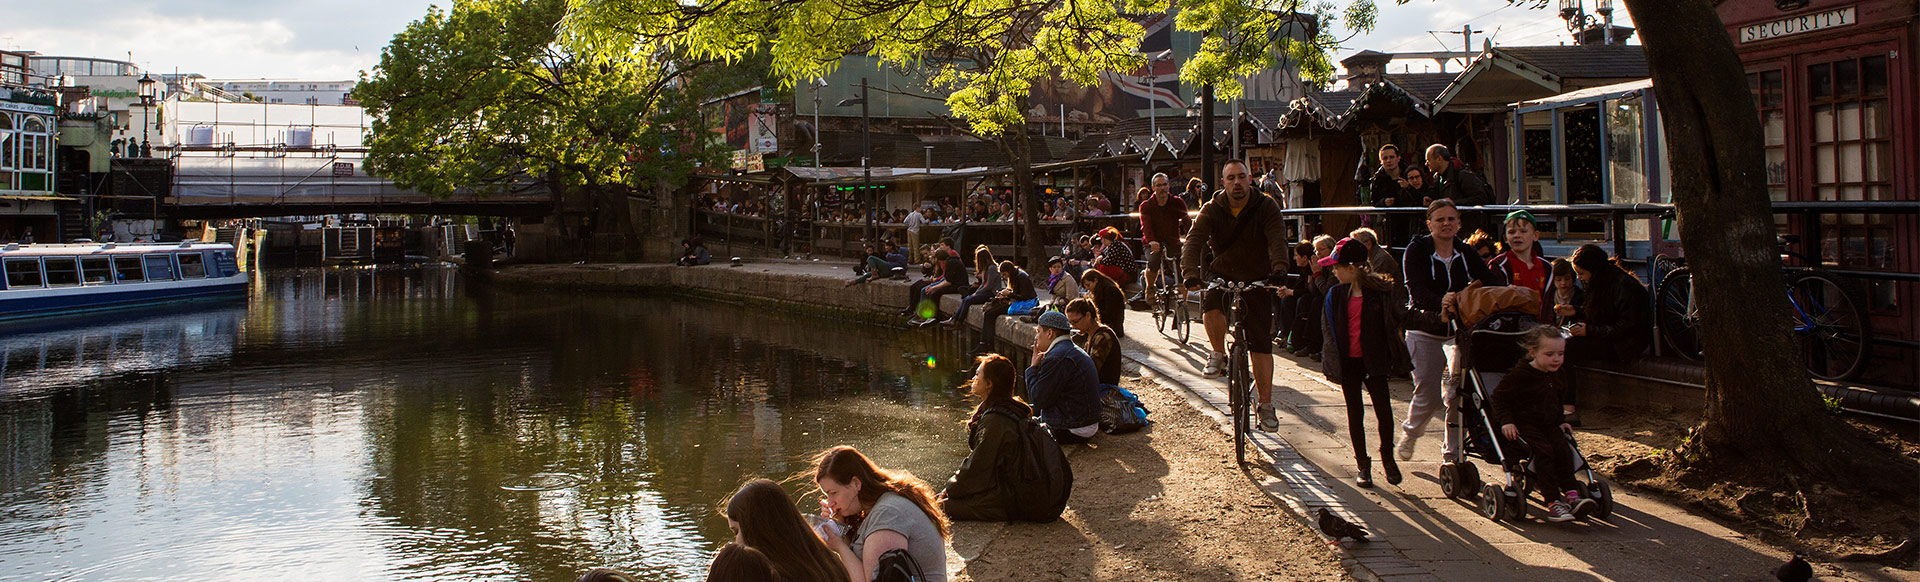 Camden Lock and Regent's Canal, with visitors sitting and walking next to the canal. © London and Partners/Michael Heffernan